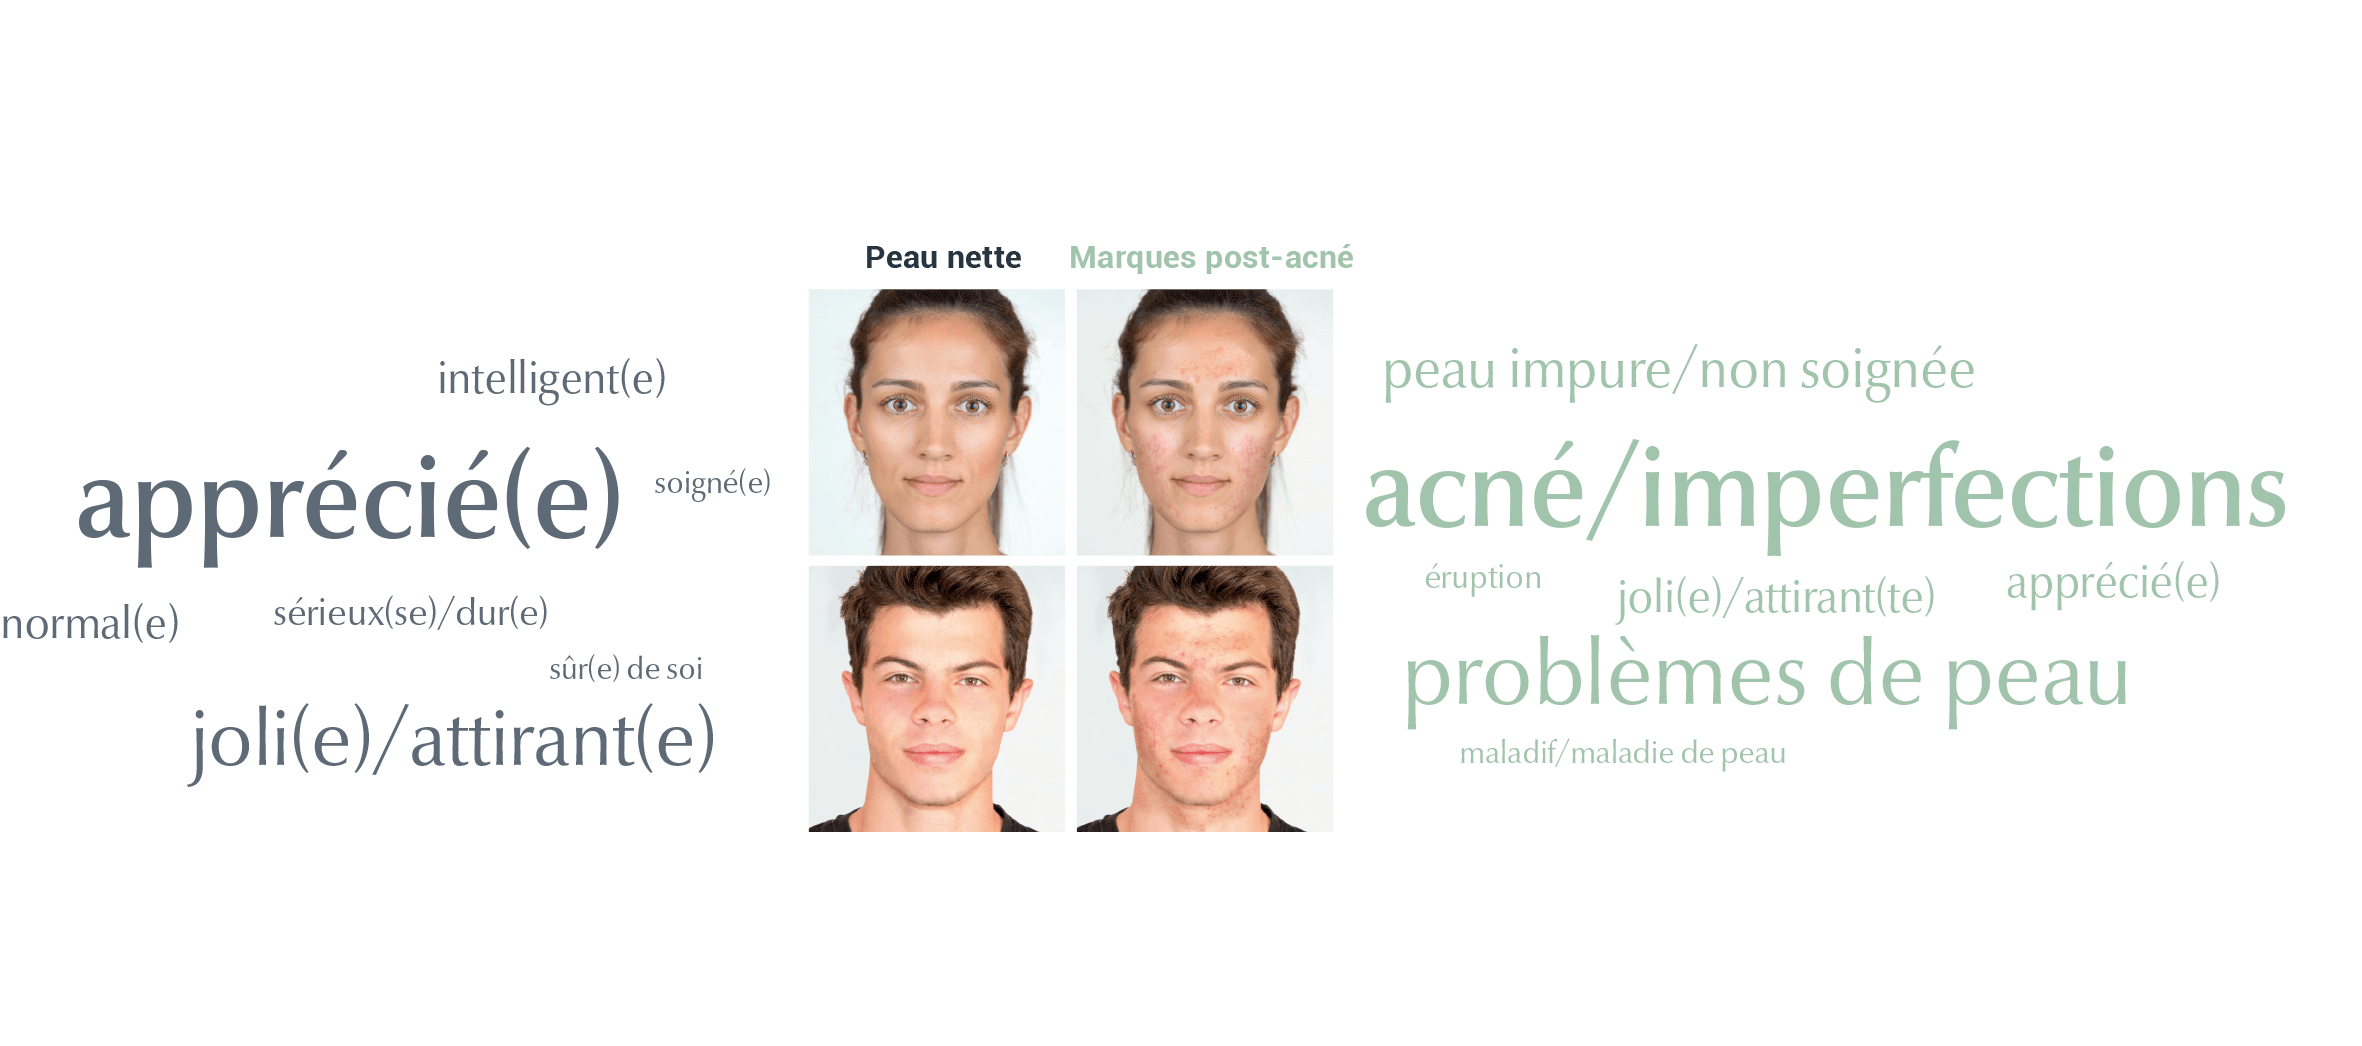 Explore how people with acne marks are perceived in our society.